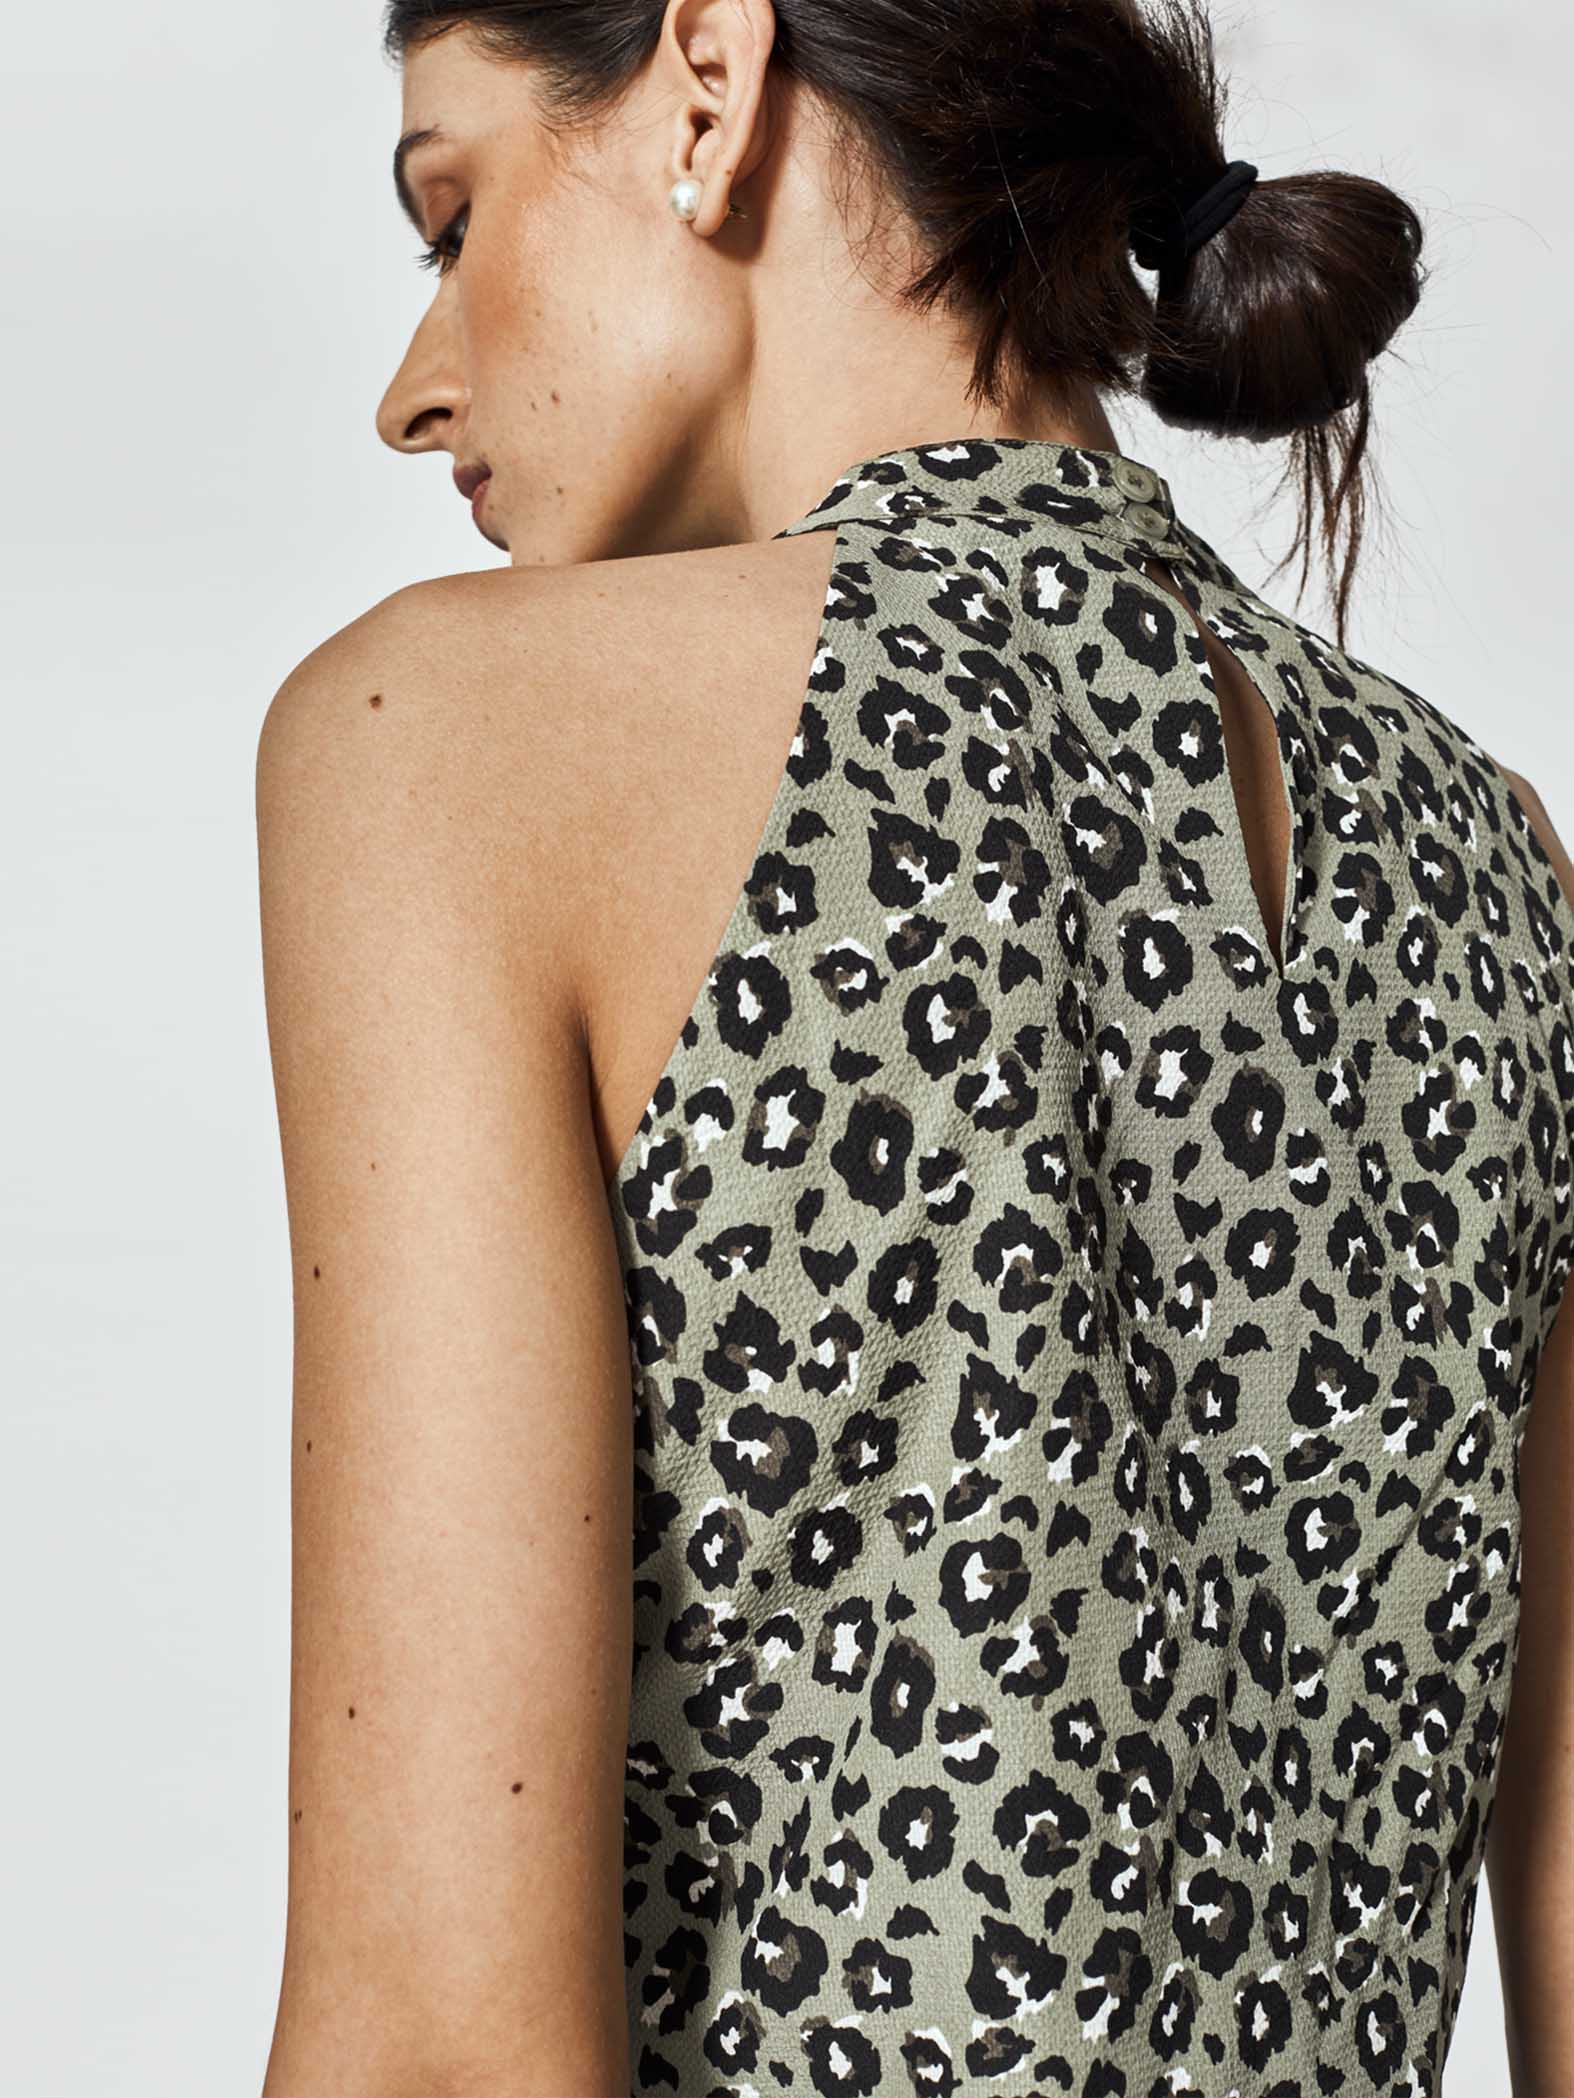 Olive Leopard Sleeveless Top